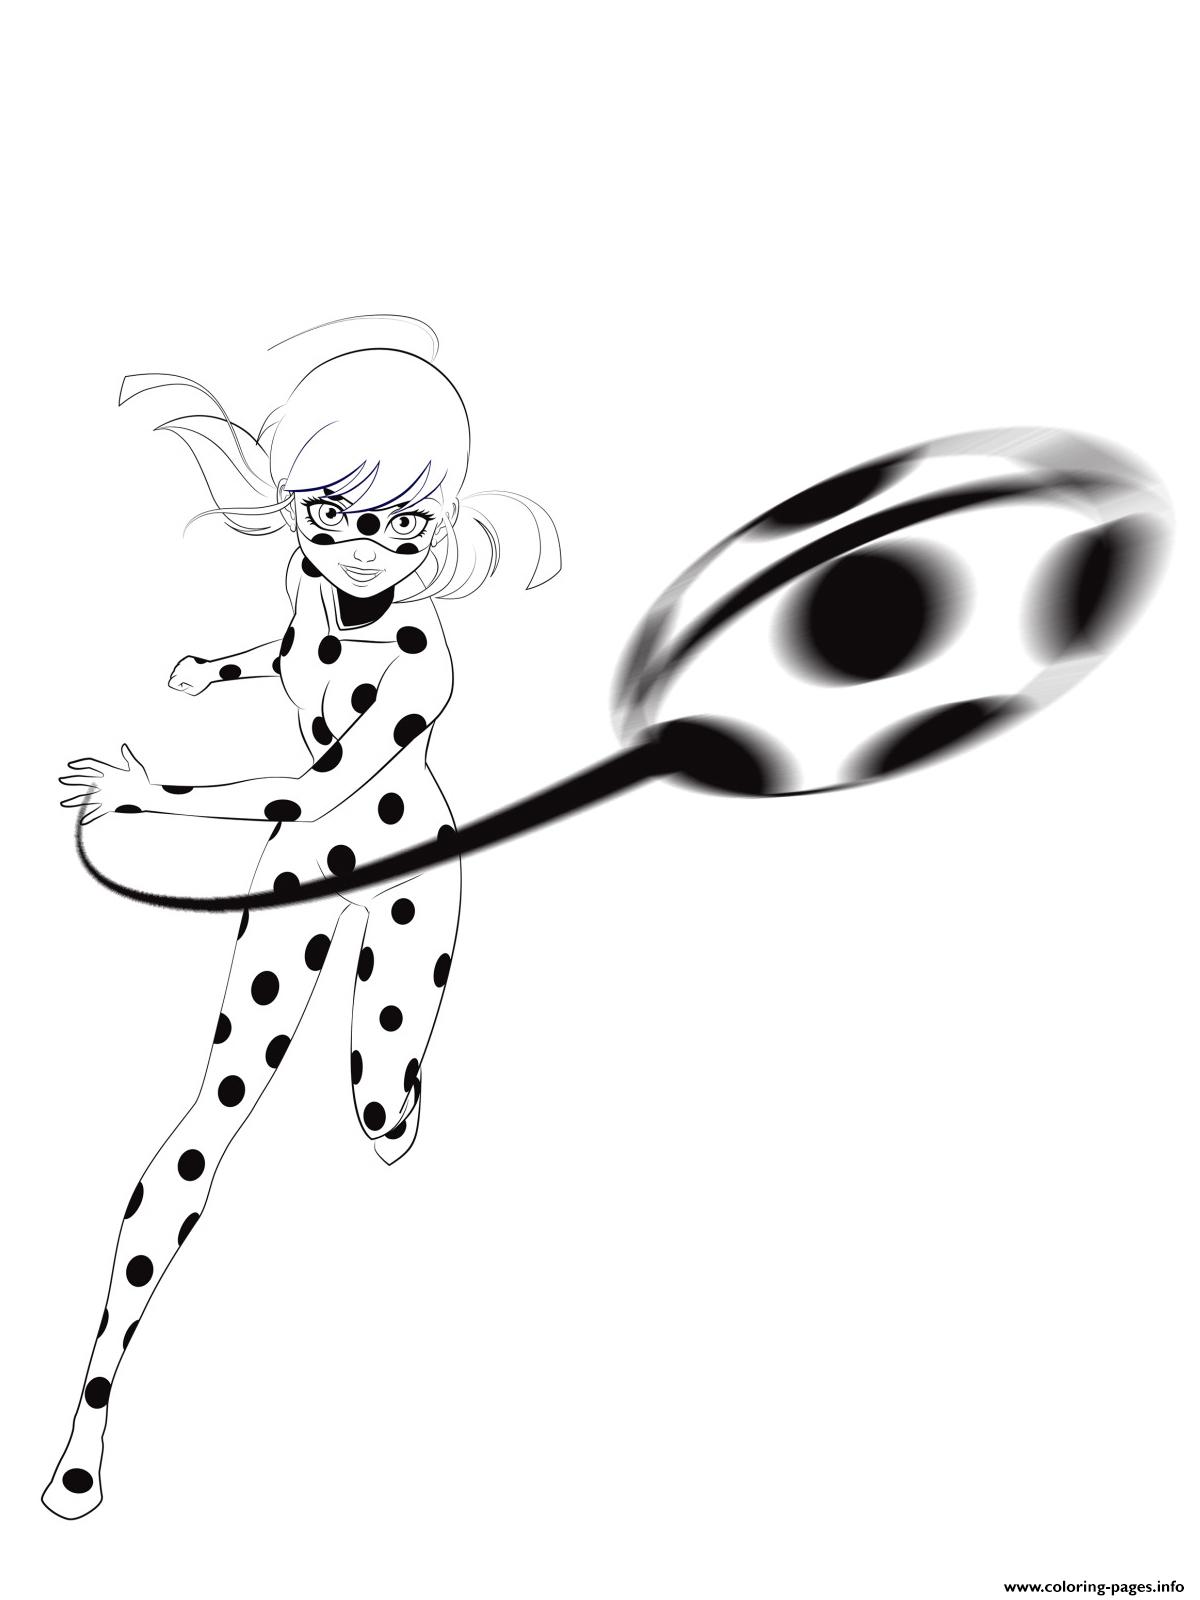 Miraculous Ladybug 2 Coloring Pages Printable